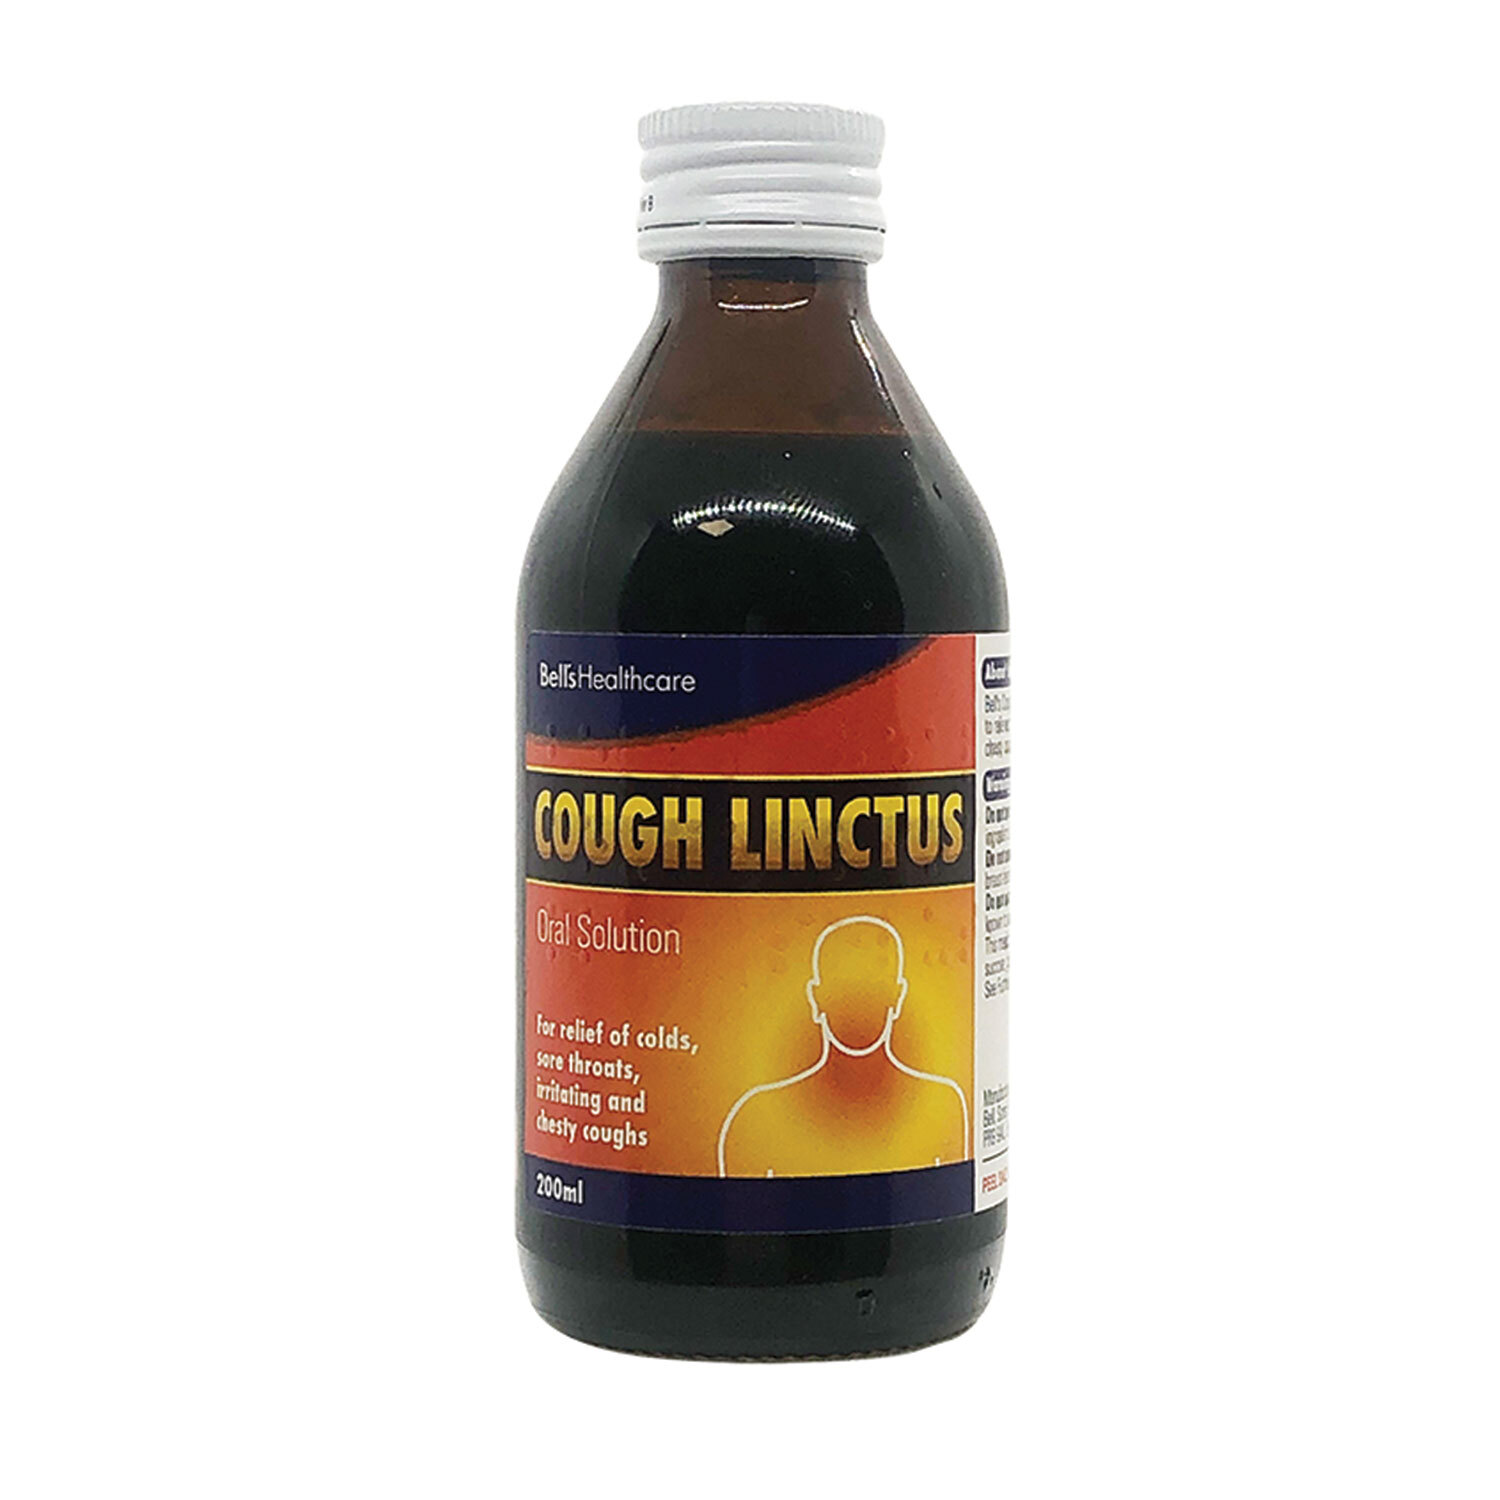 Bell's Healthcare Cough Linctus 200ml Image